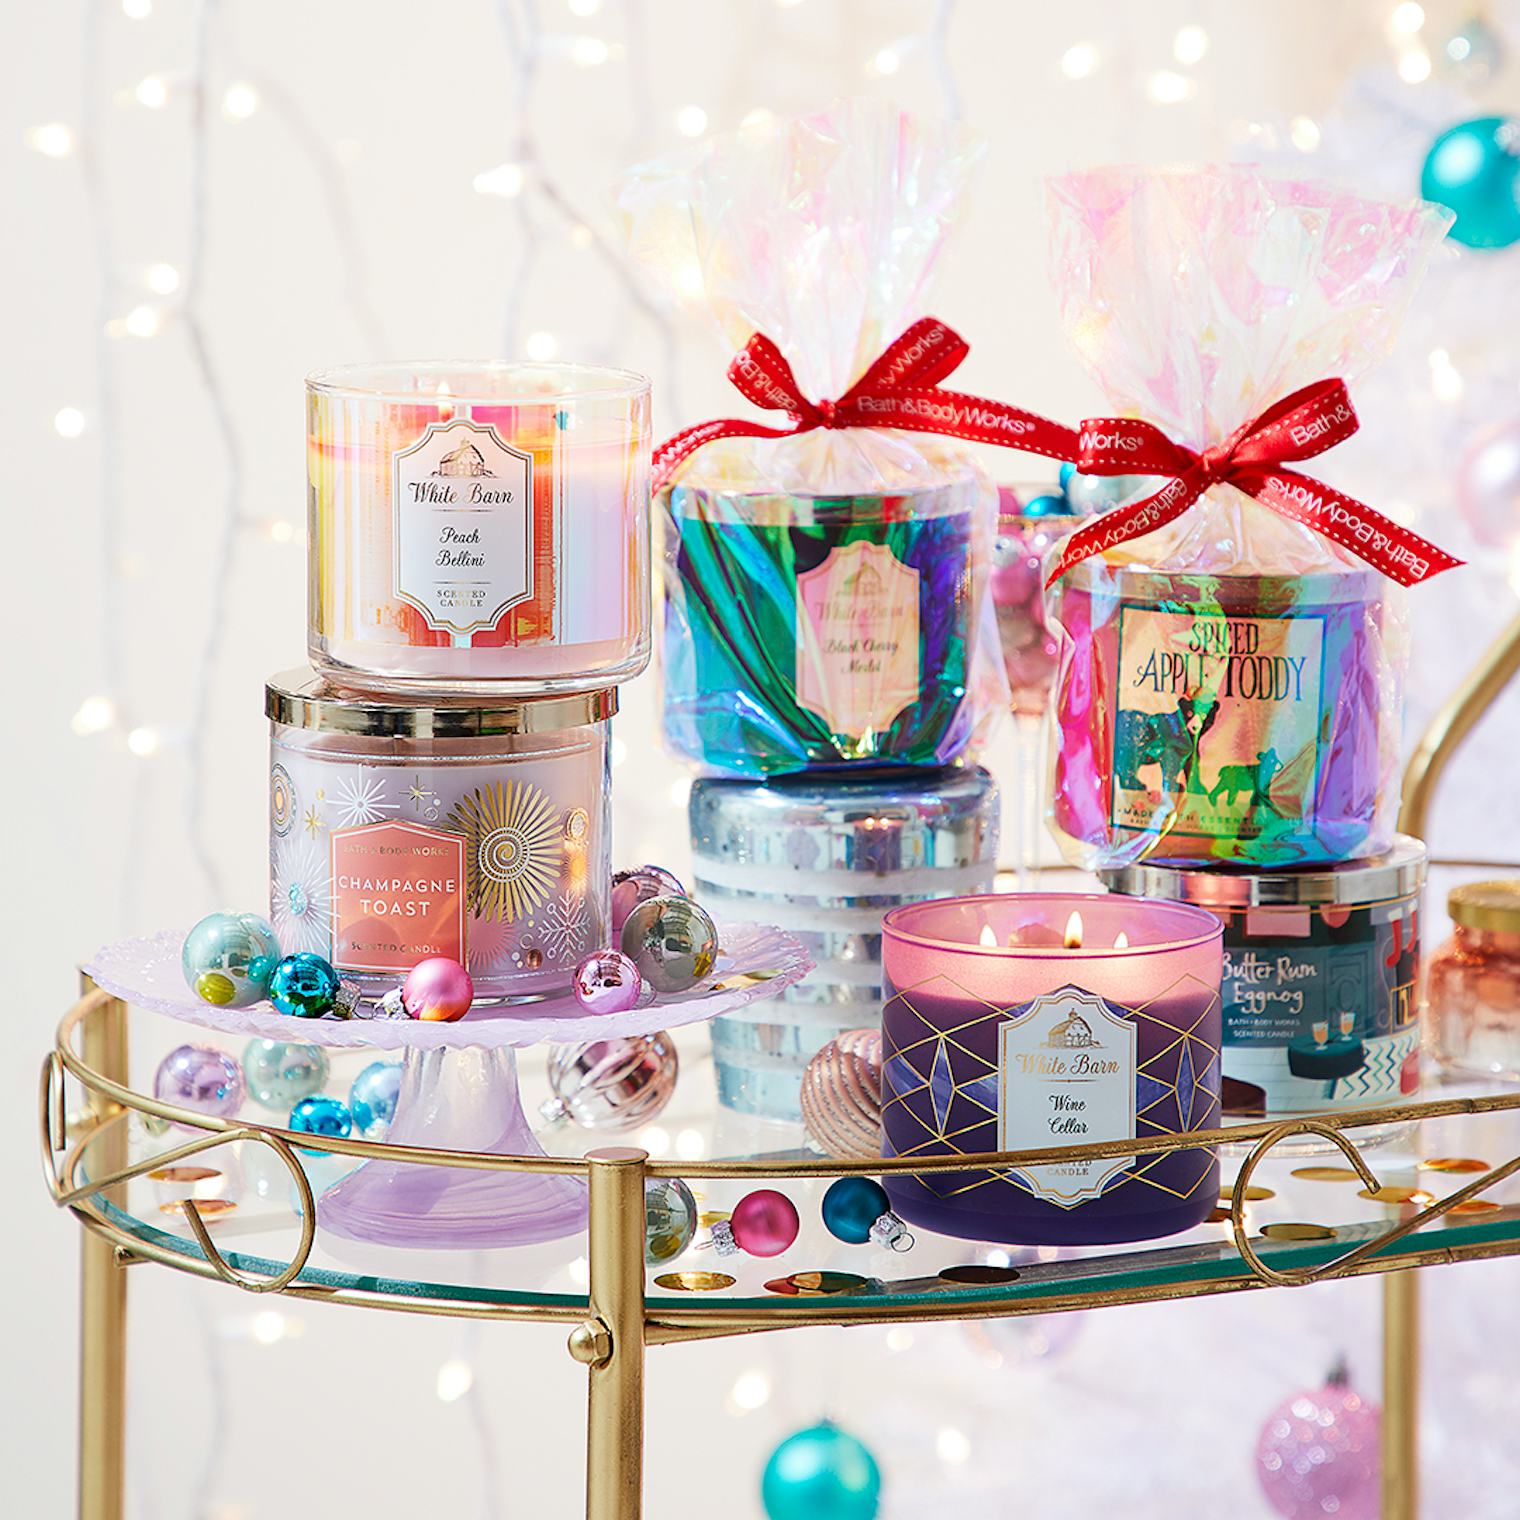 What Are Bath & Body Works' Holiday Scents? These Sweet Smells Will Get